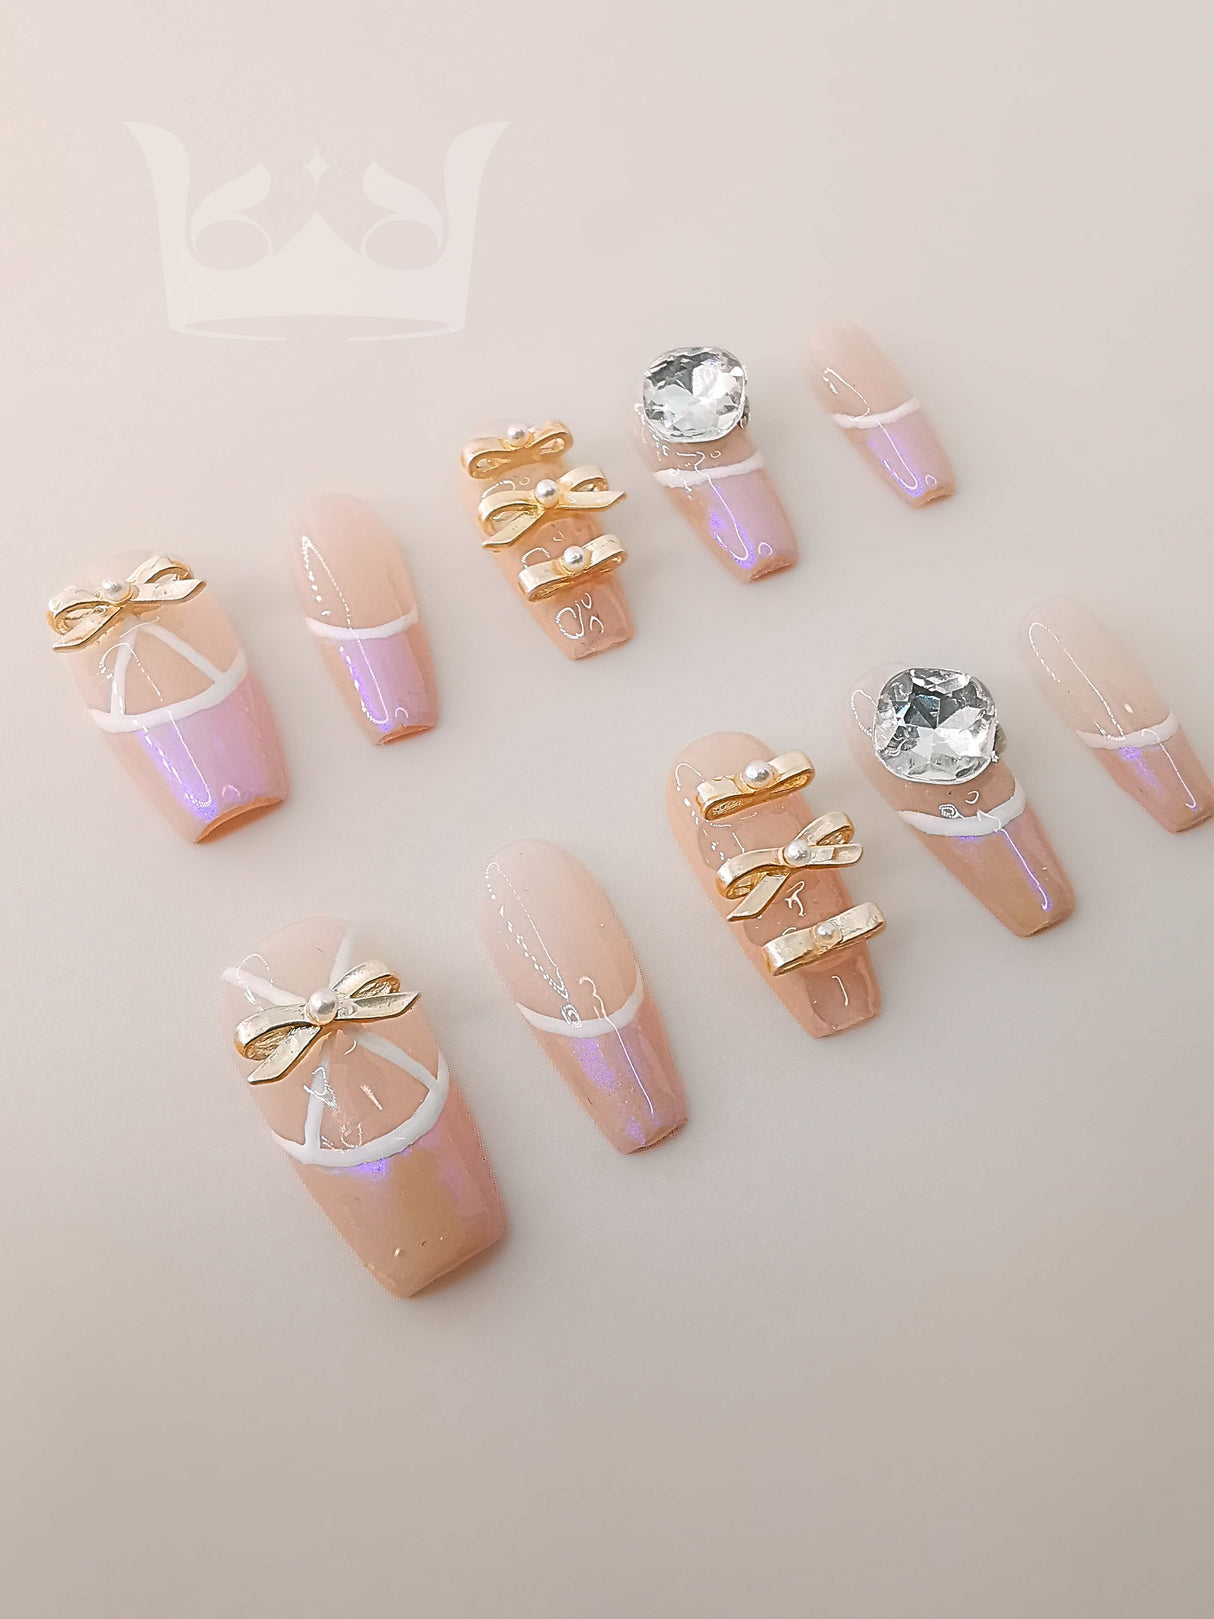 These press-on nails are perfect for girls who want to add a unique touch to their look. They feature neutral colors, accent nails, patterns, and textures, and matte and glossy finishe.